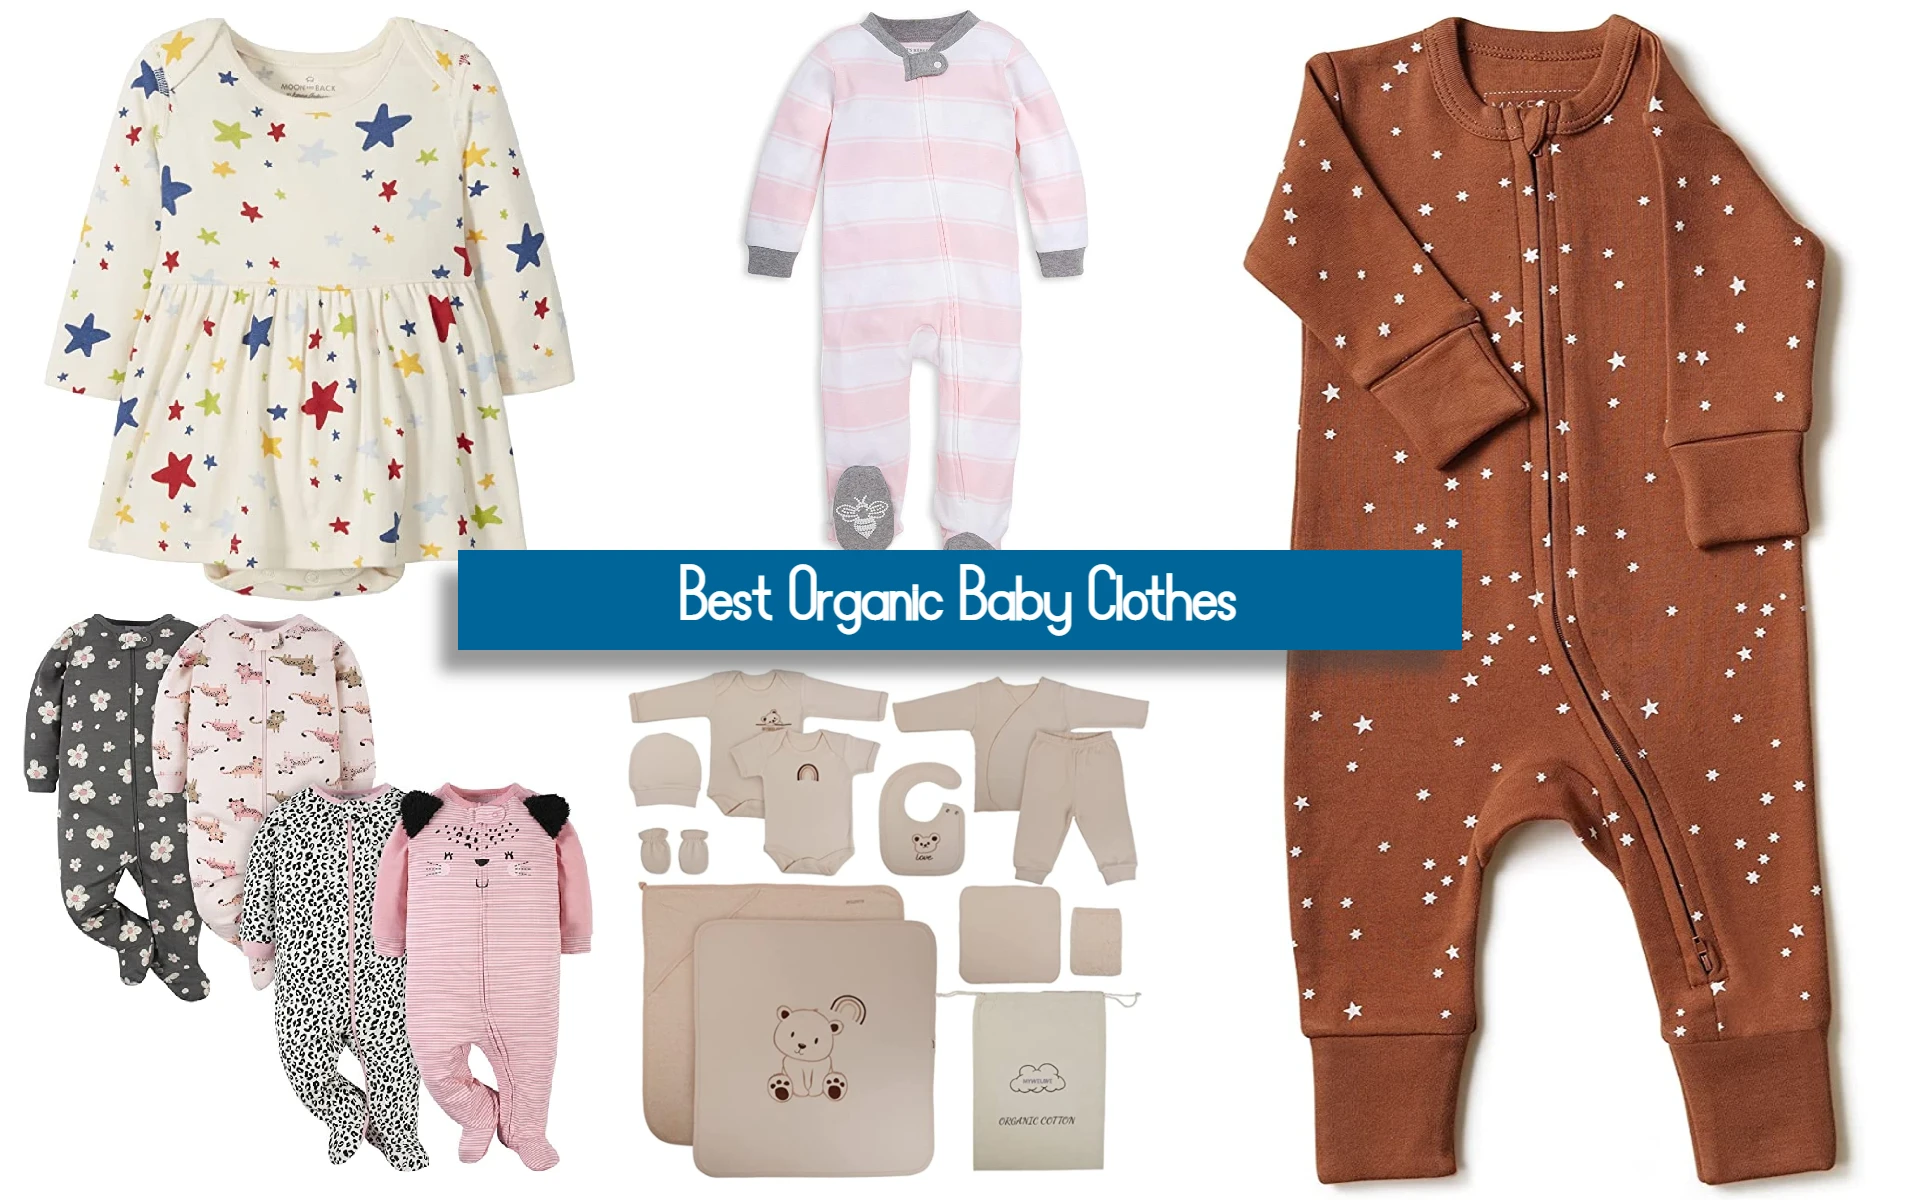 Best Organic Baby Clothes